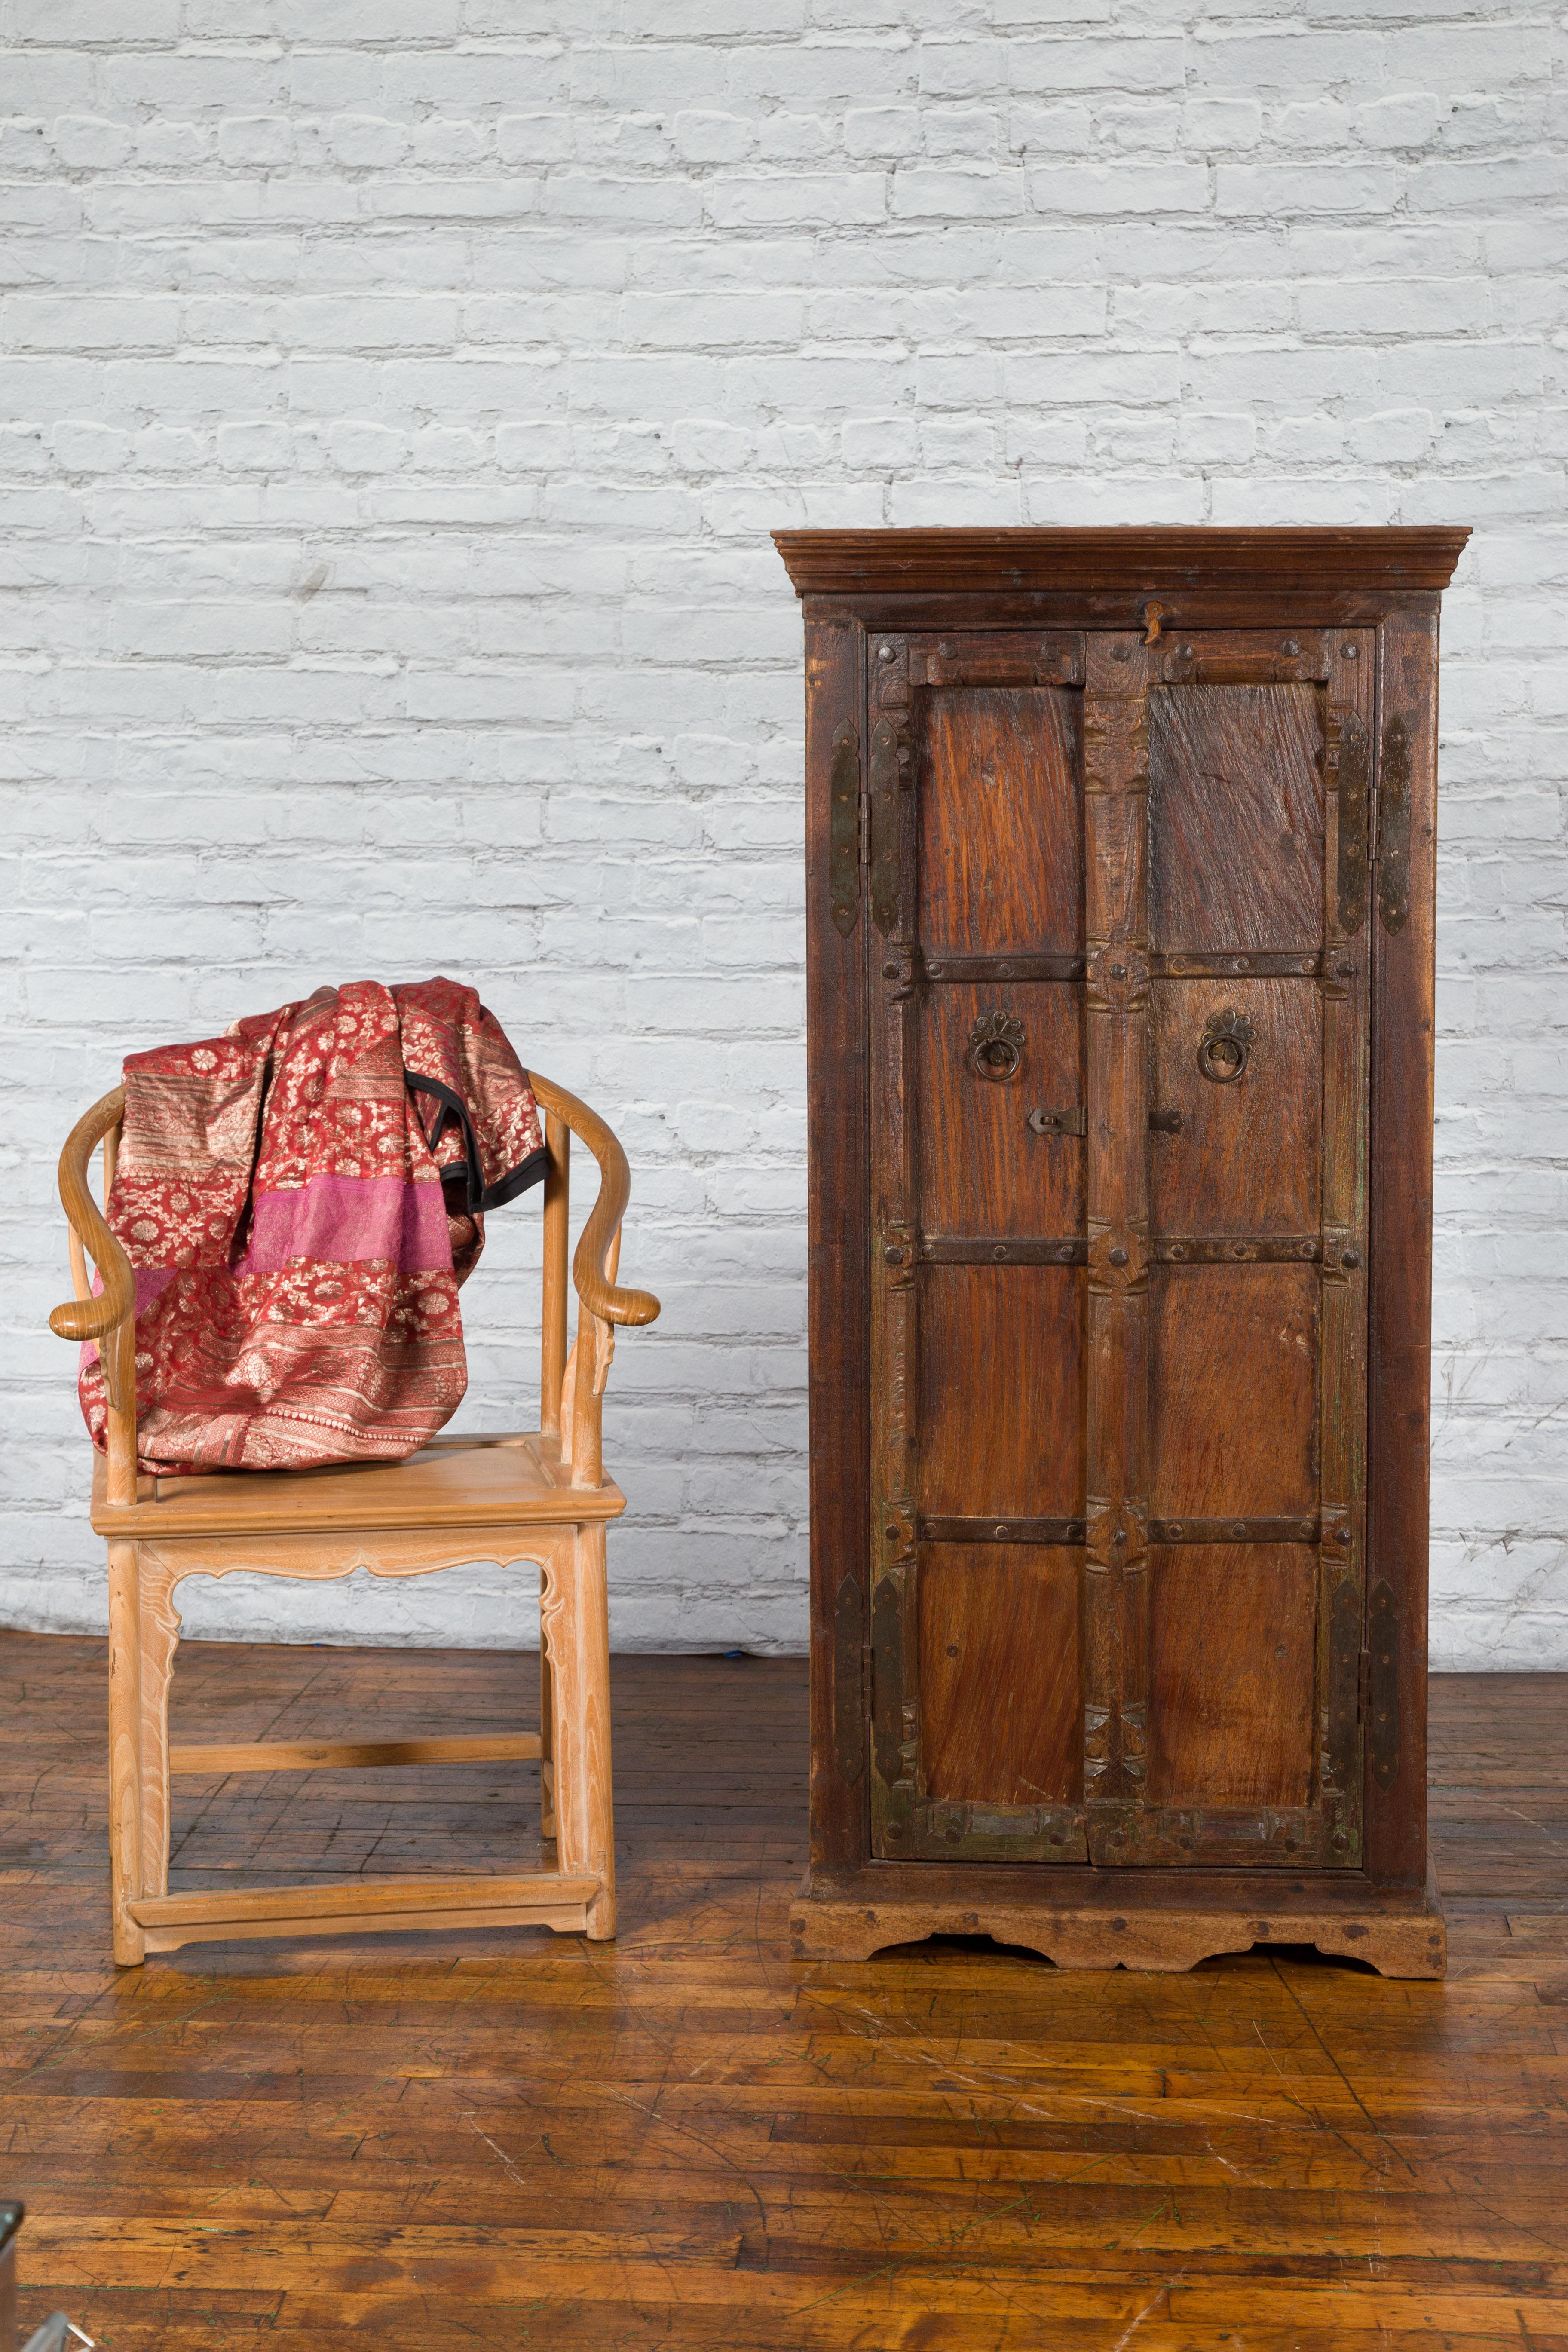 Rustic Indian 19th Century Gujarat Armoire with Iron Braces and Carved Half Columns For Sale